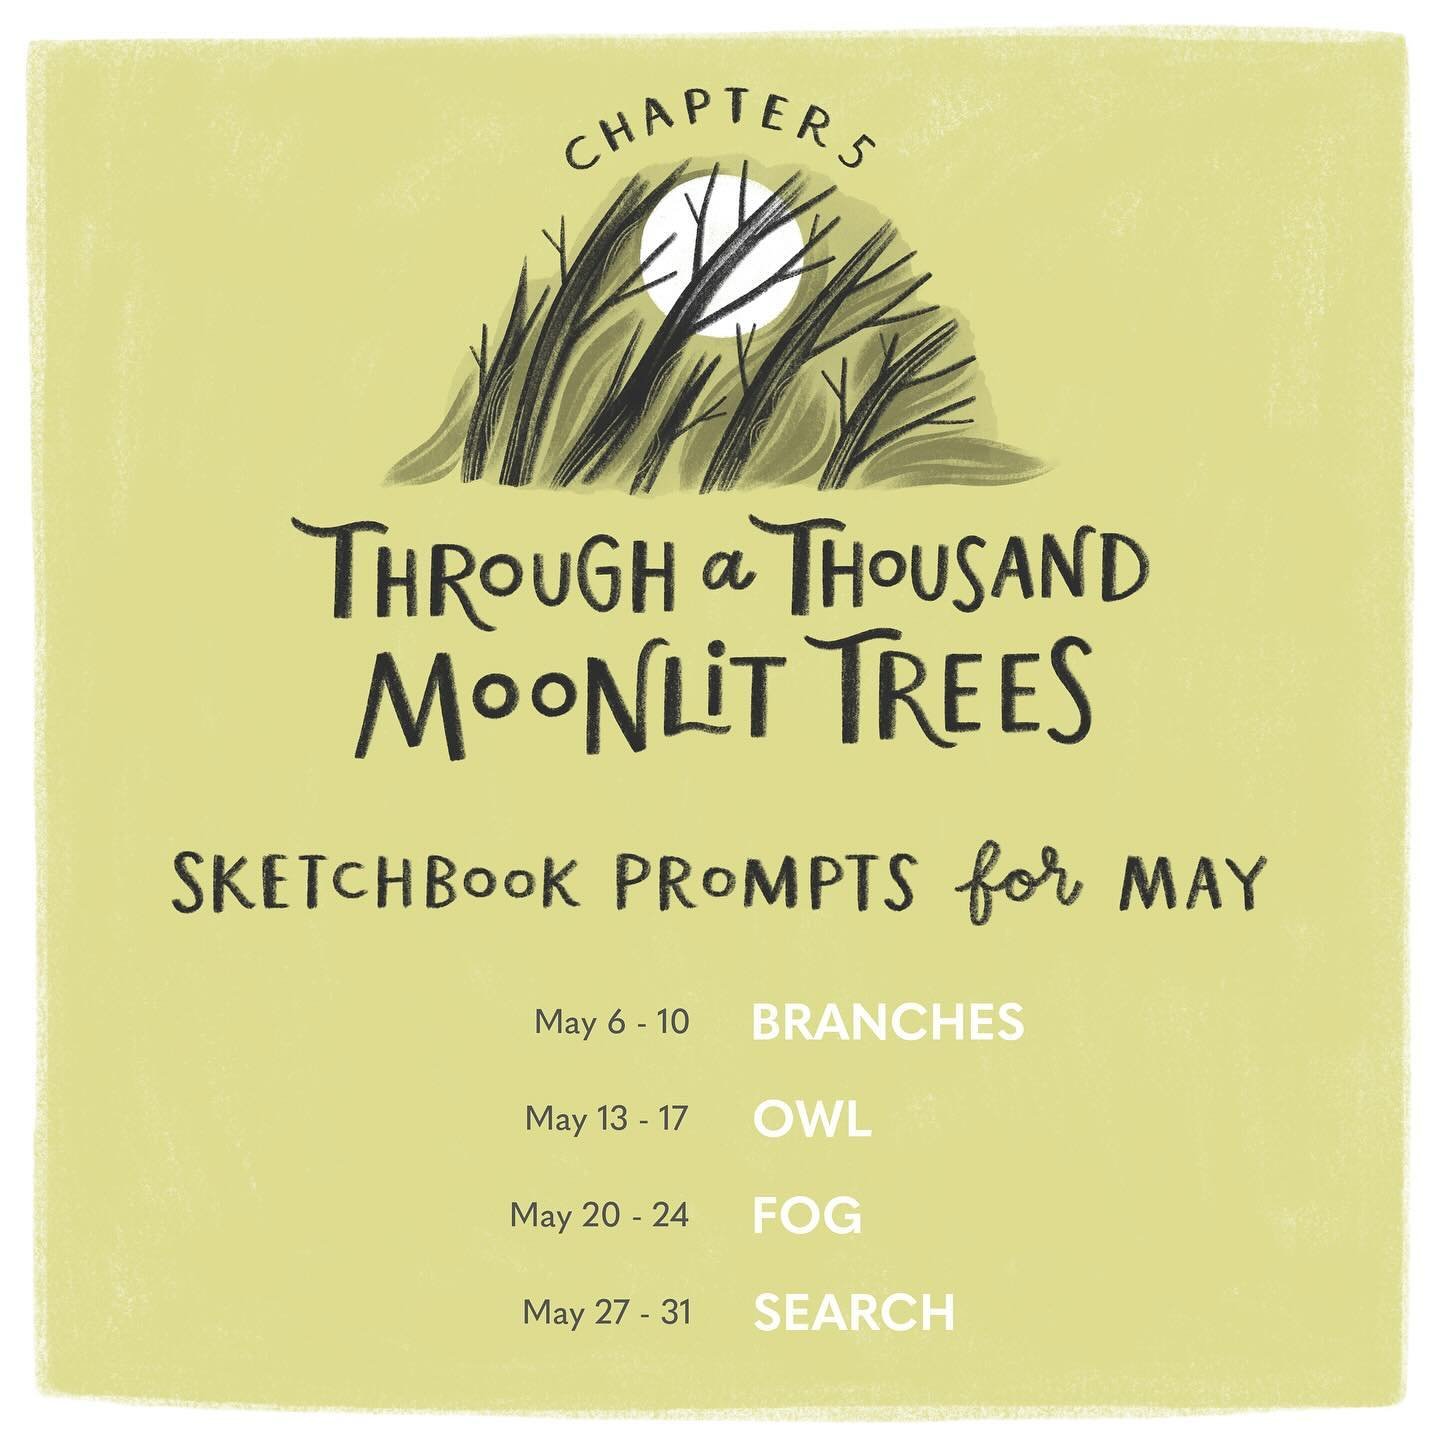 Not going to lie, May has me a little 🫠 and we&rsquo;re less than a week in but I&rsquo;m trying my best to put on my big girl boots and just walk through the mud. New sketchbook prompts at least? ✨ Swipe for a little round up of April spreads - the